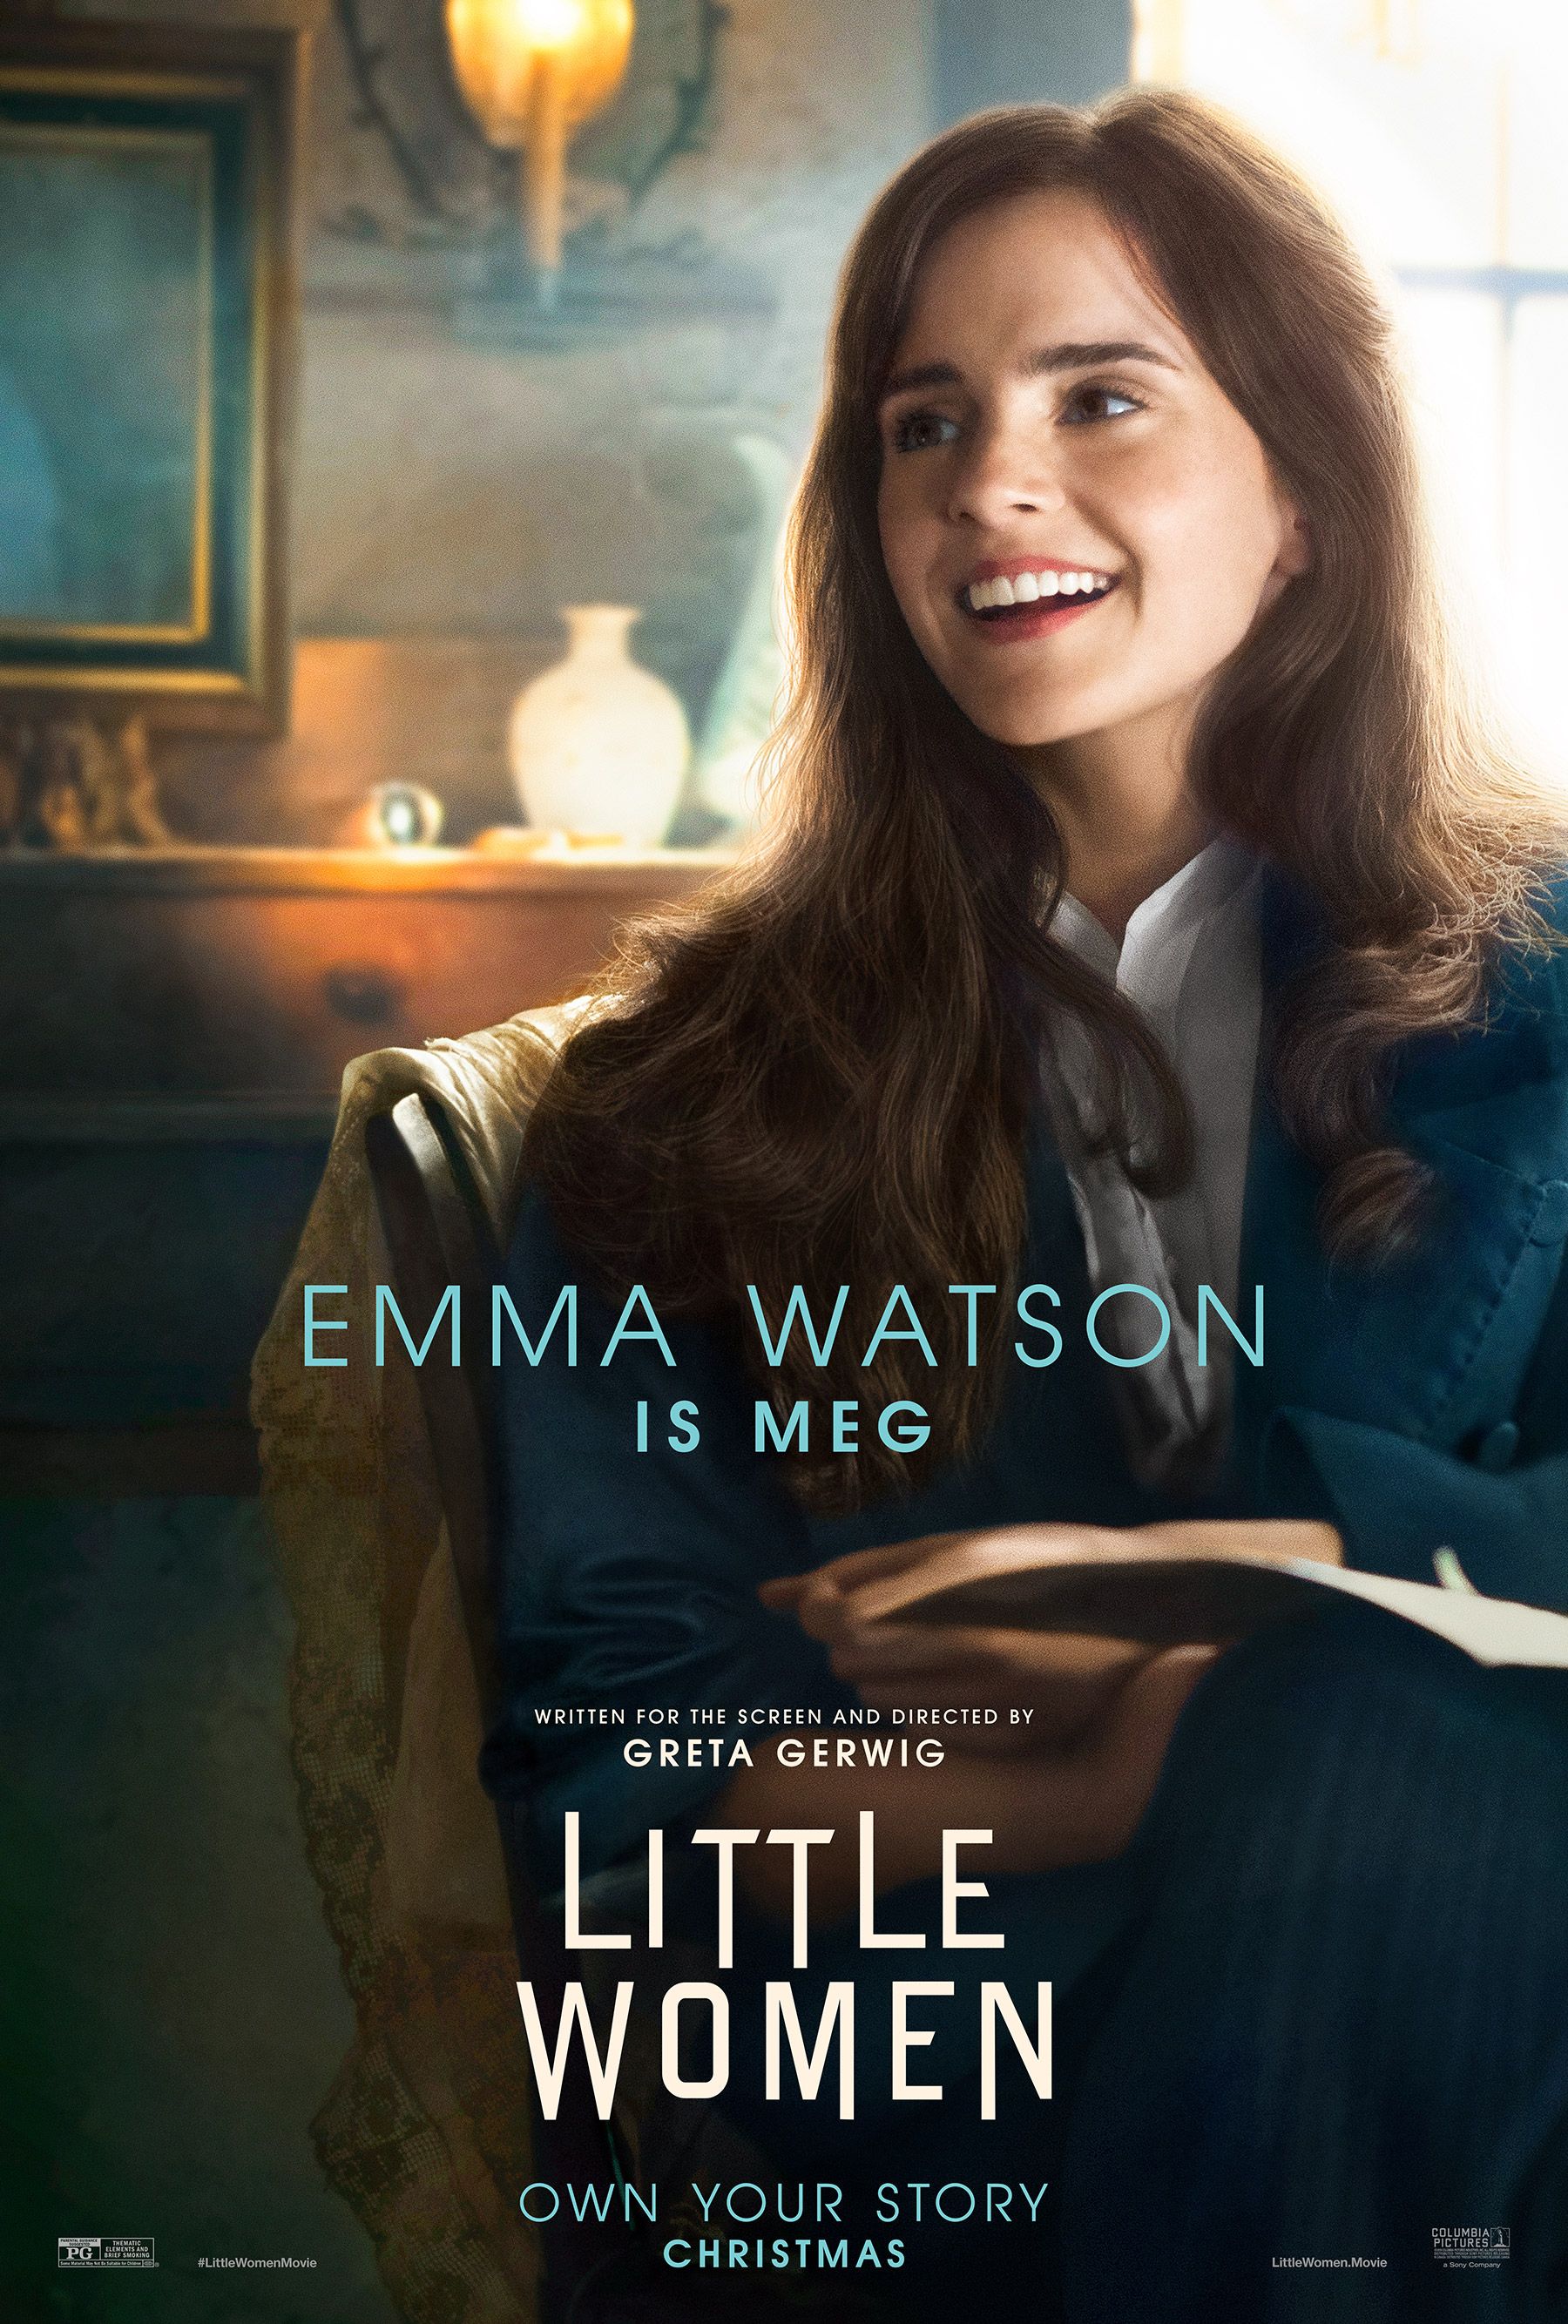 30 Heart Broken Quotes Saoirse Ronan Emma Watson Timothee Chalamet Are Ready To Break Hearts In New Little Women Posters Love Quotes Daily Leading Love Relationship Quotes Sayings Collections